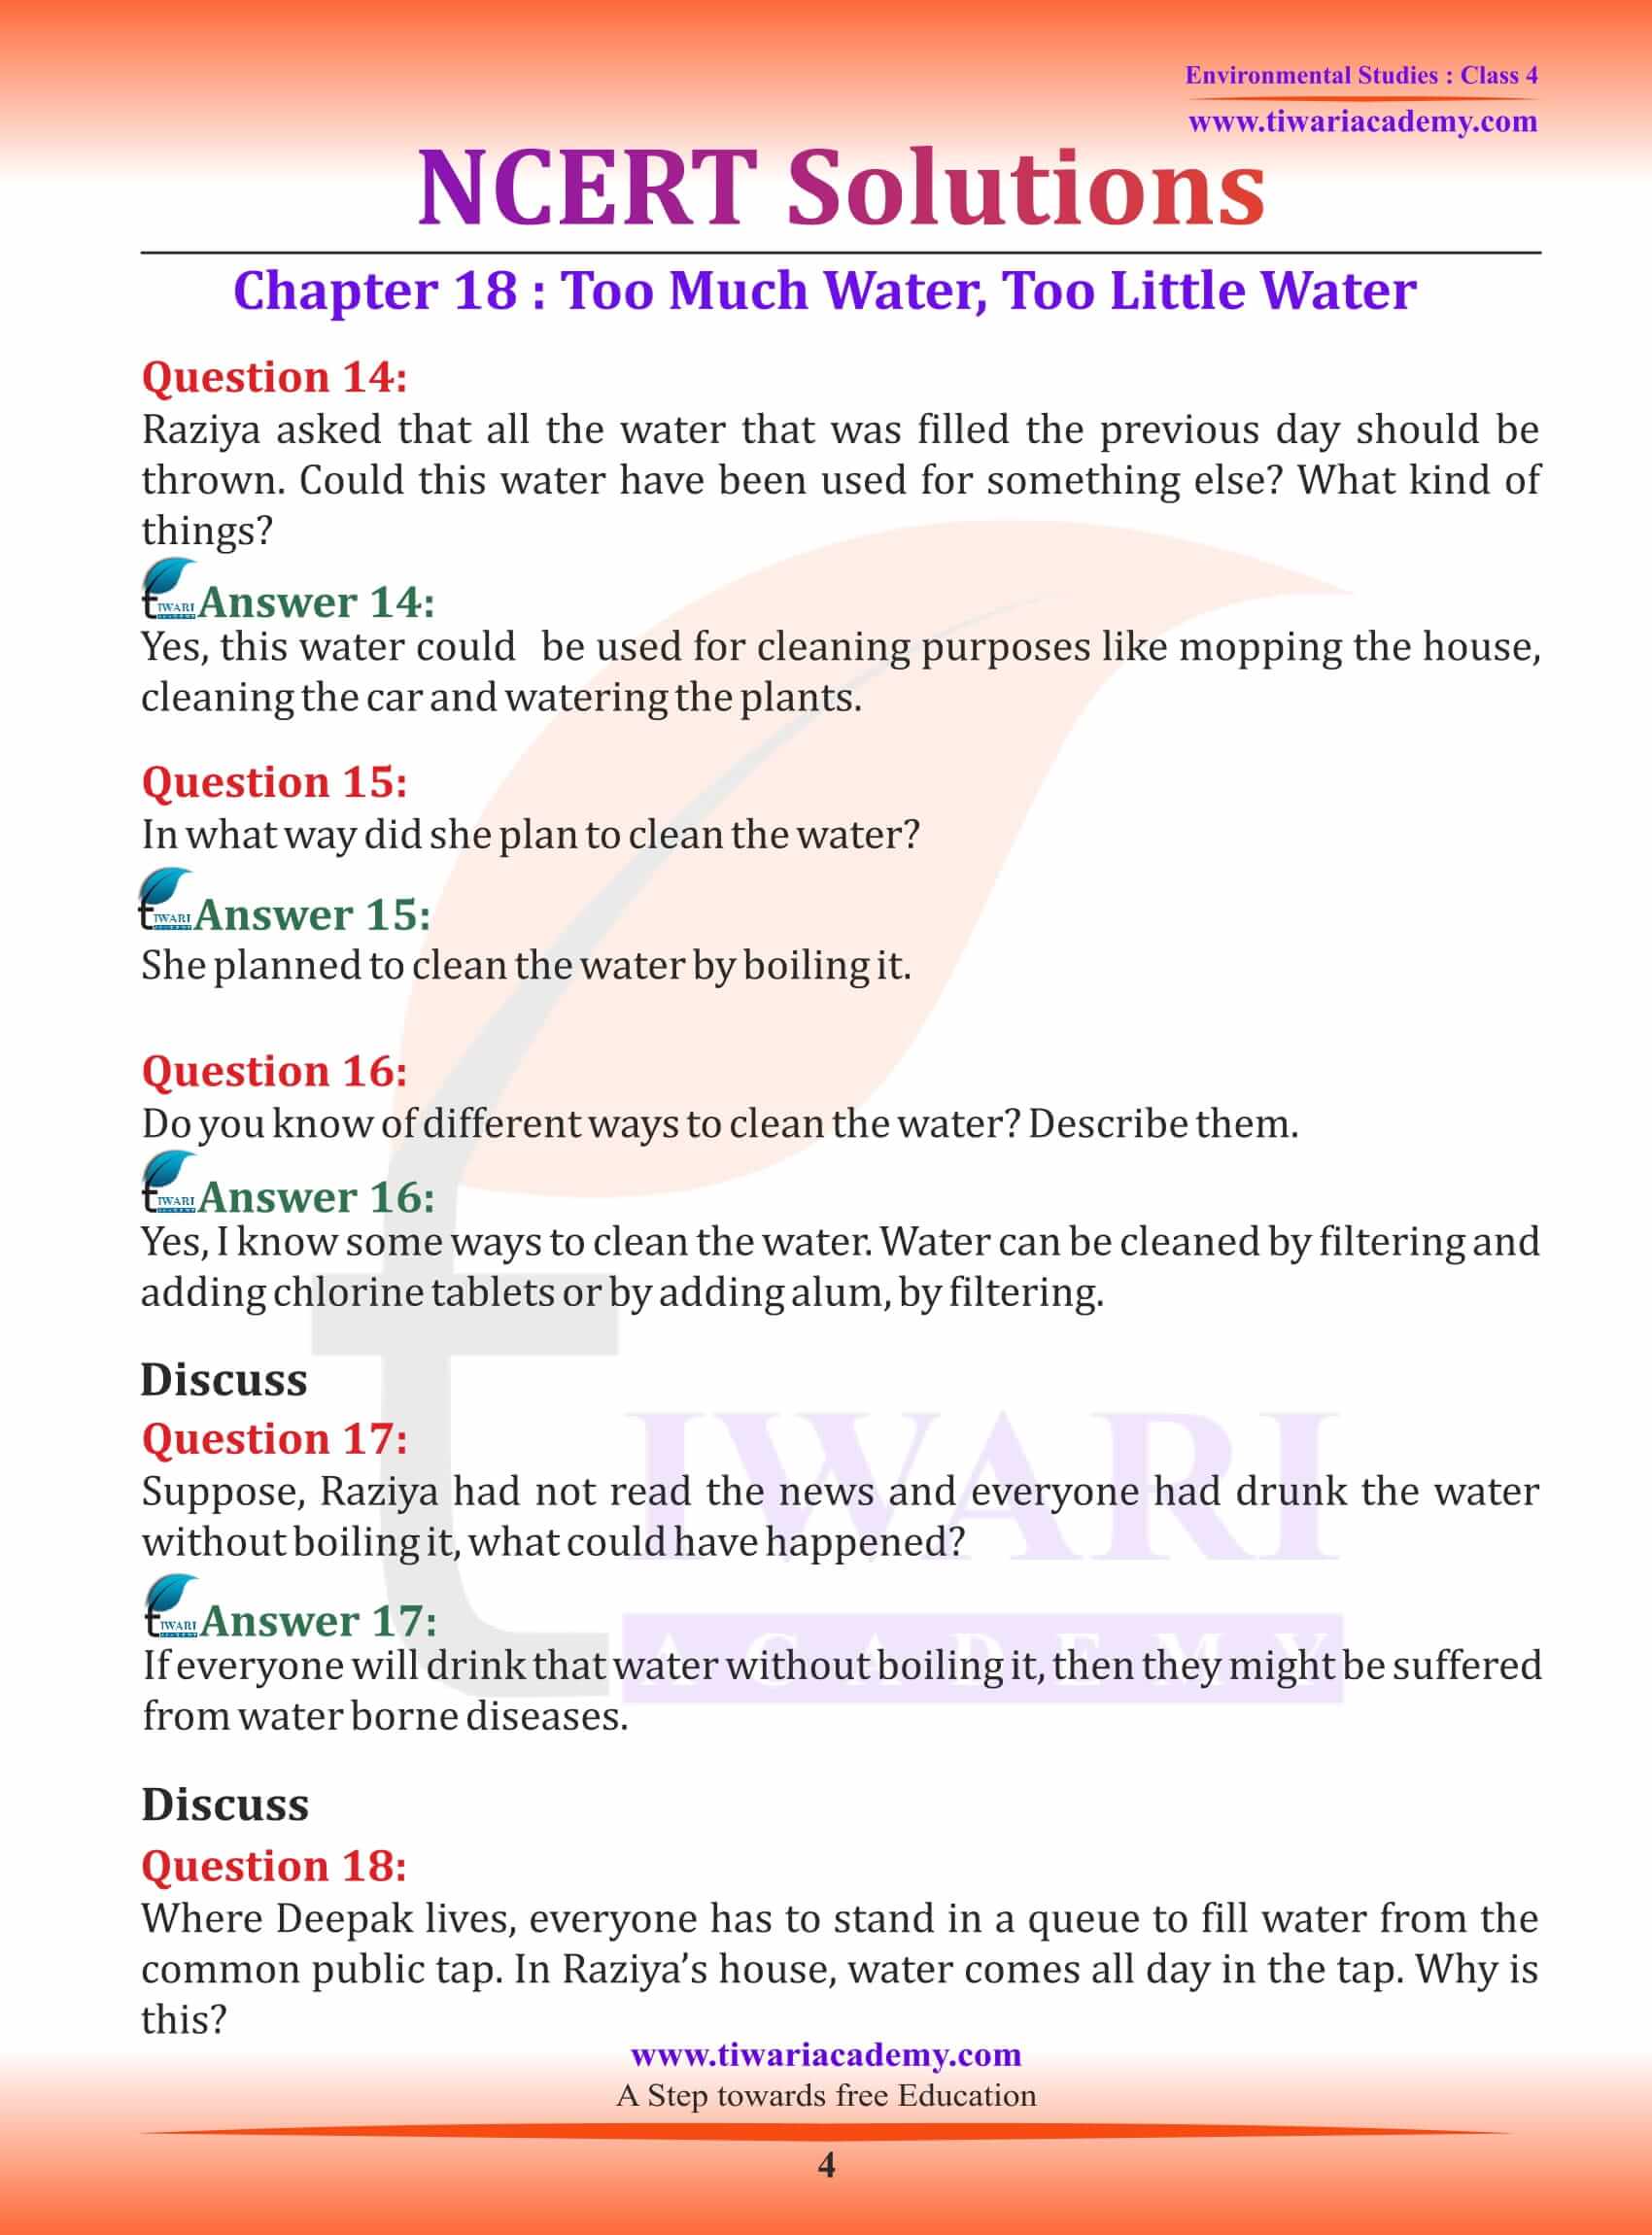 NCERT Solutions for Class 4 EVS Chapter 18 in English Medium